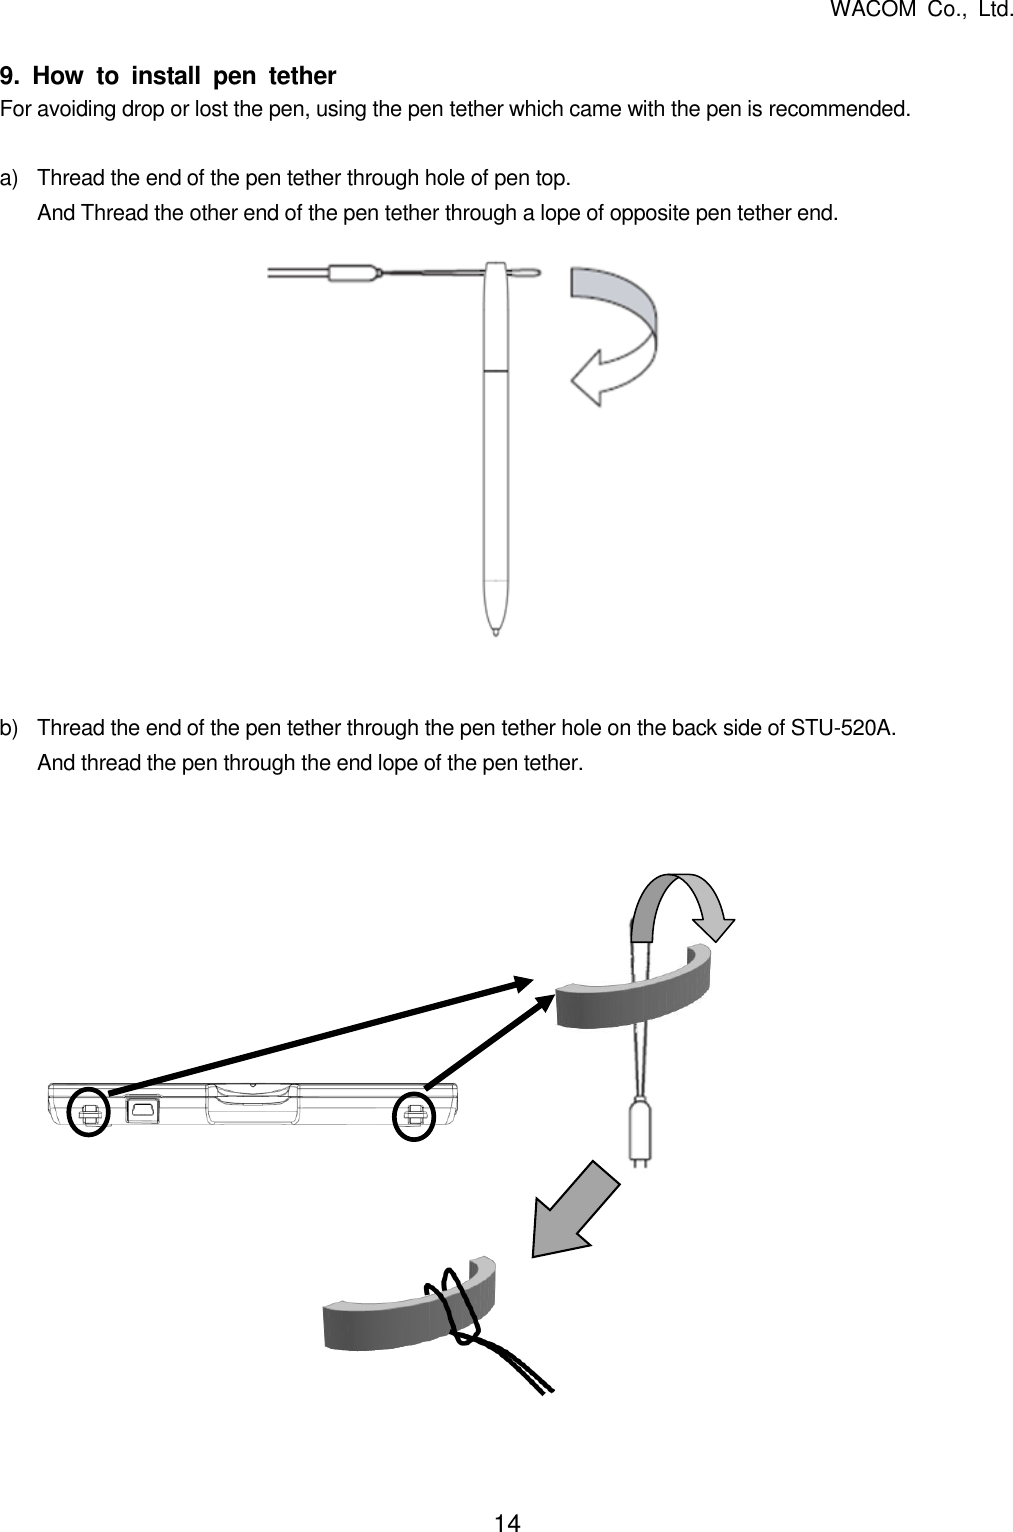   WACOM  Co.,  Ltd. 14   9.  How  to  install  pen  tether For avoiding drop or lost the pen, using the pen tether which came with the pen is recommended.  a) Thread the end of the pen tether through hole of pen top. And Thread the other end of the pen tether through a lope of opposite pen tether end.               b)  Thread the end of the pen tether through the pen tether hole on the back side of STU-520A. And thread the pen through the end lope of the pen tether.                  